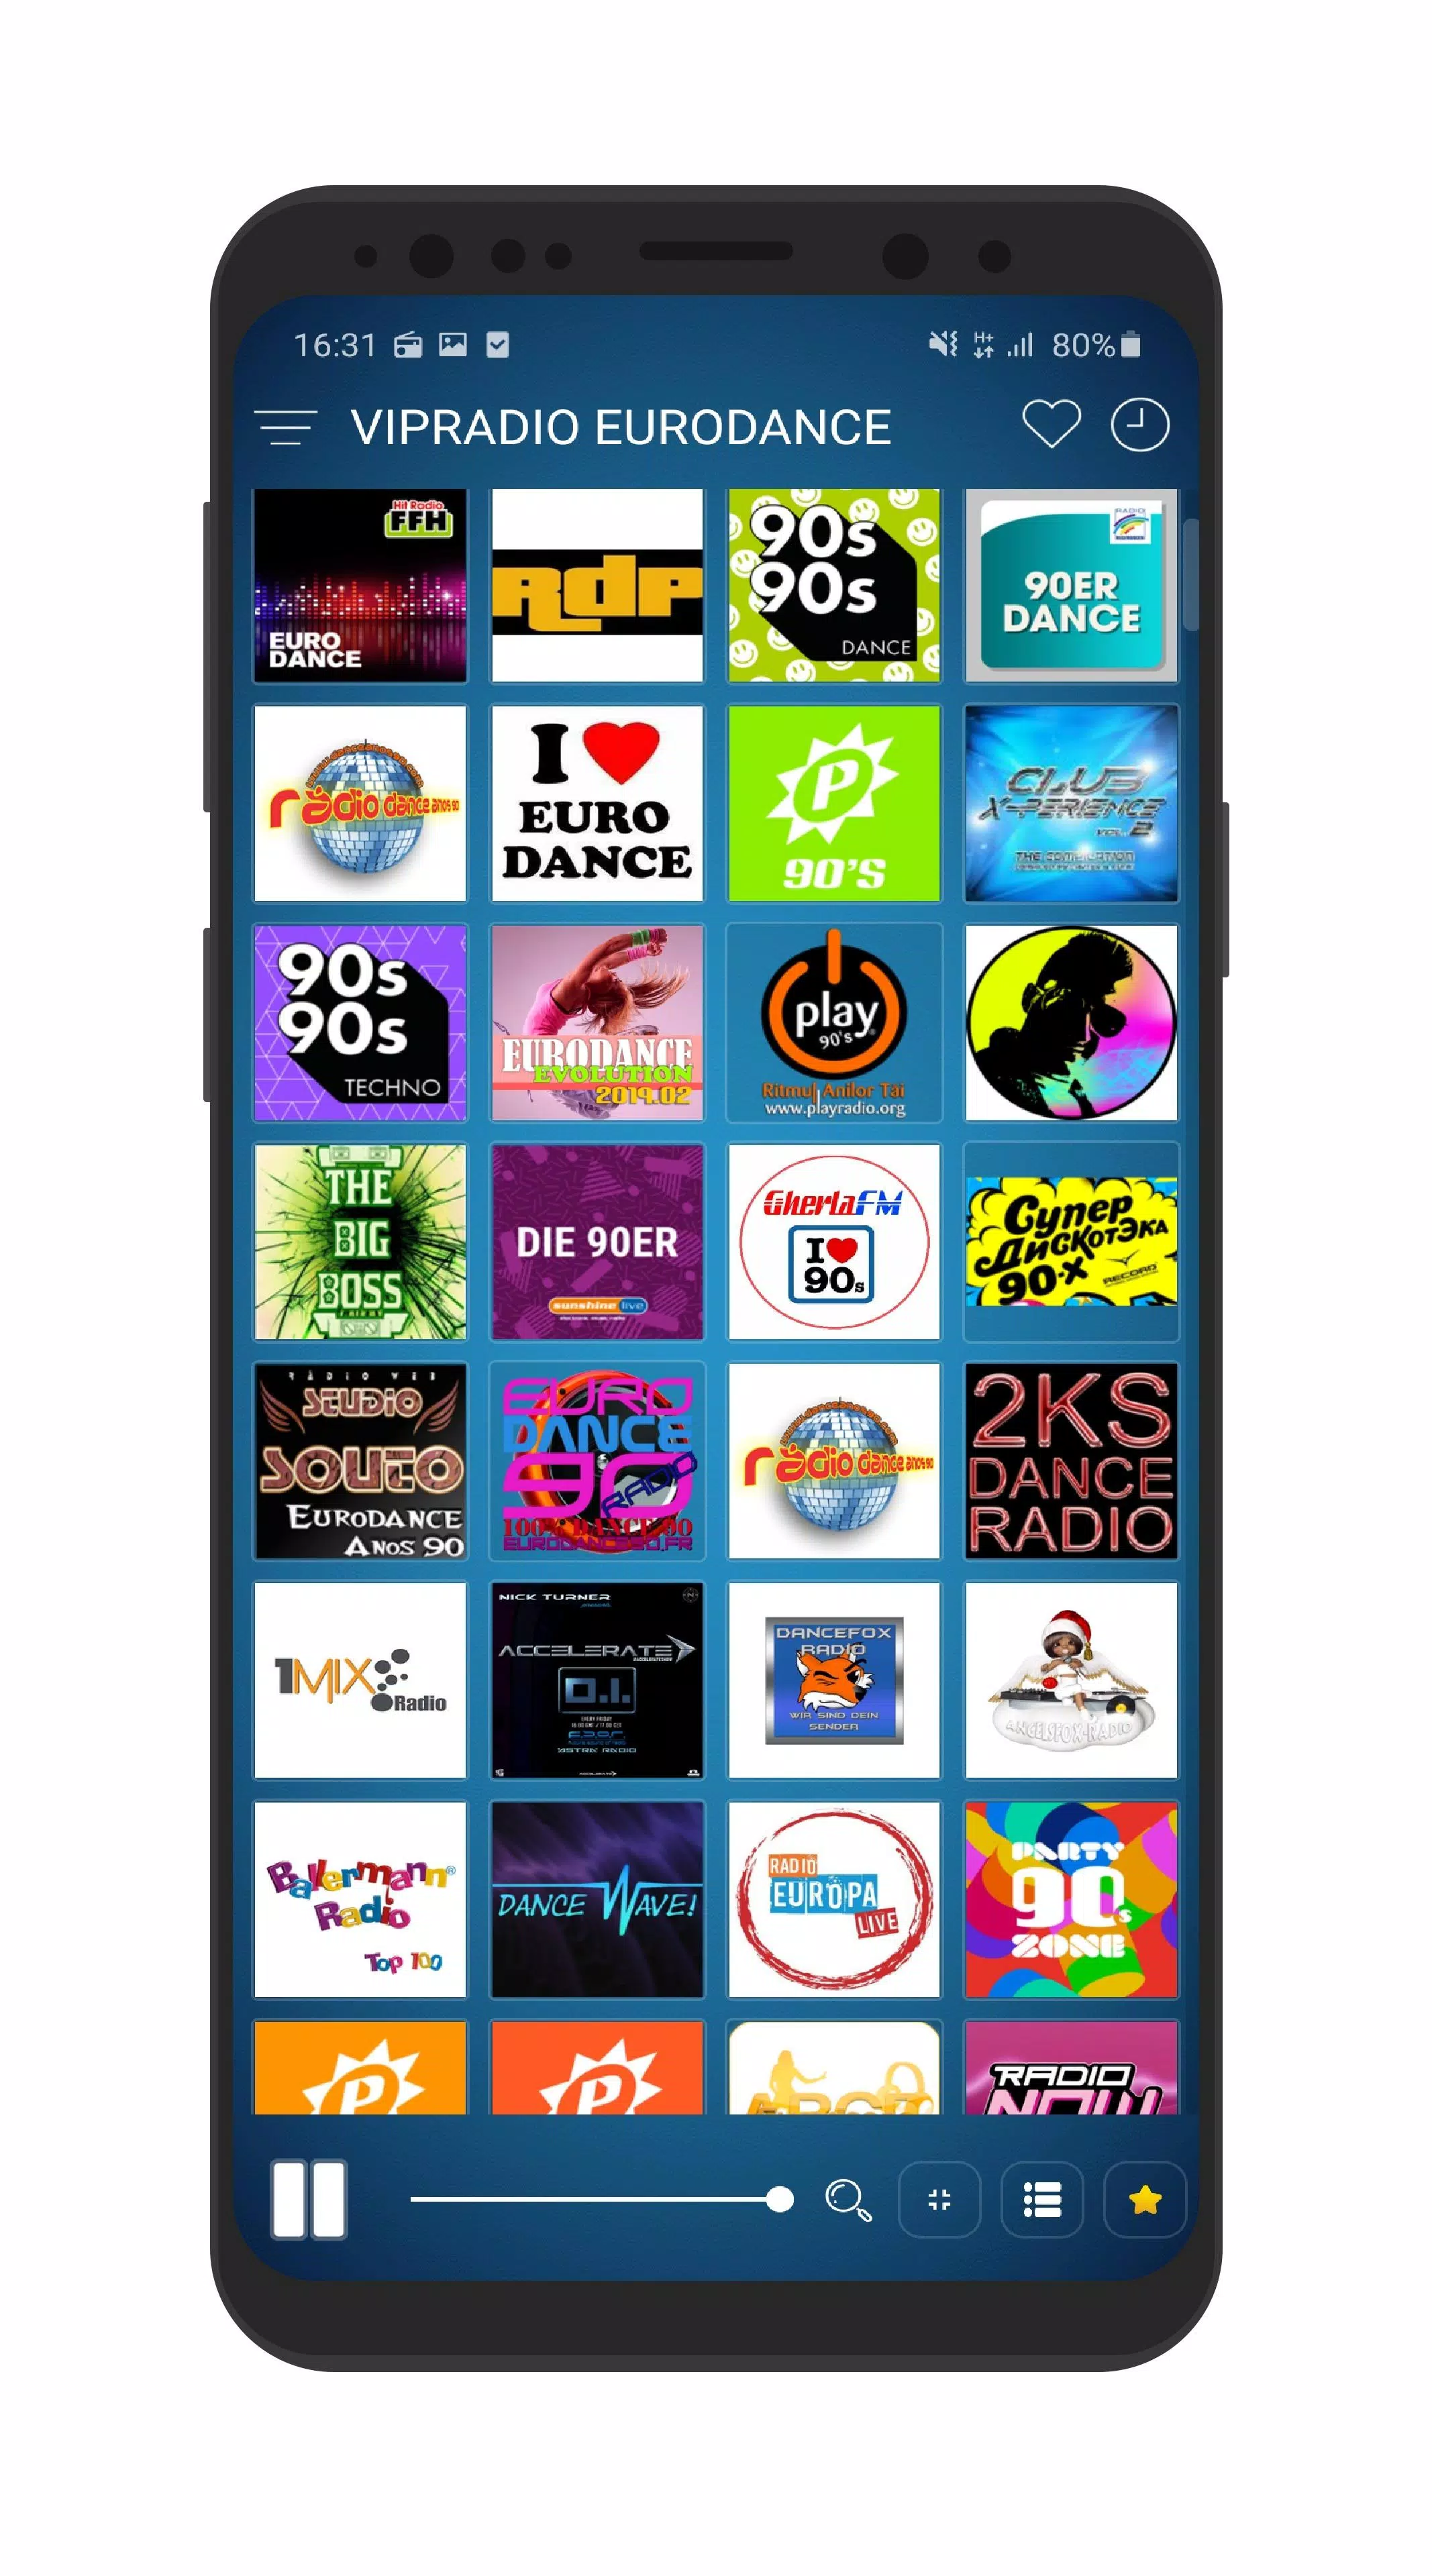 Eurodance 90s for Android - APK Download